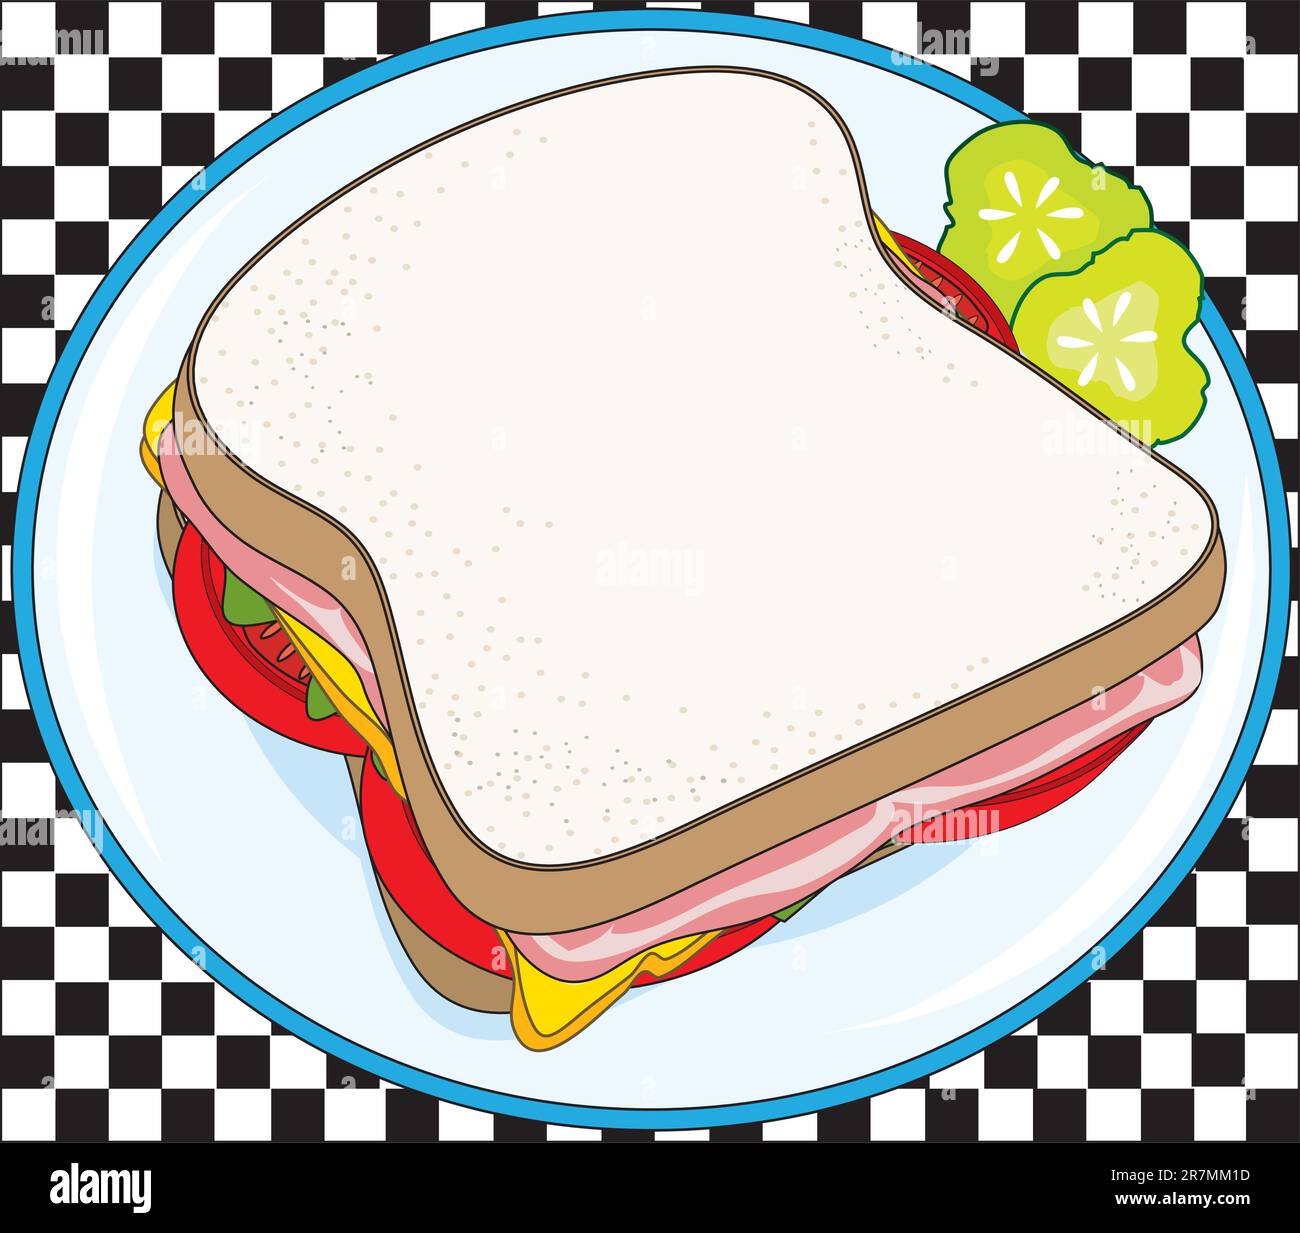 A deli sandwich on a plate with some pickle slices Stock Vector